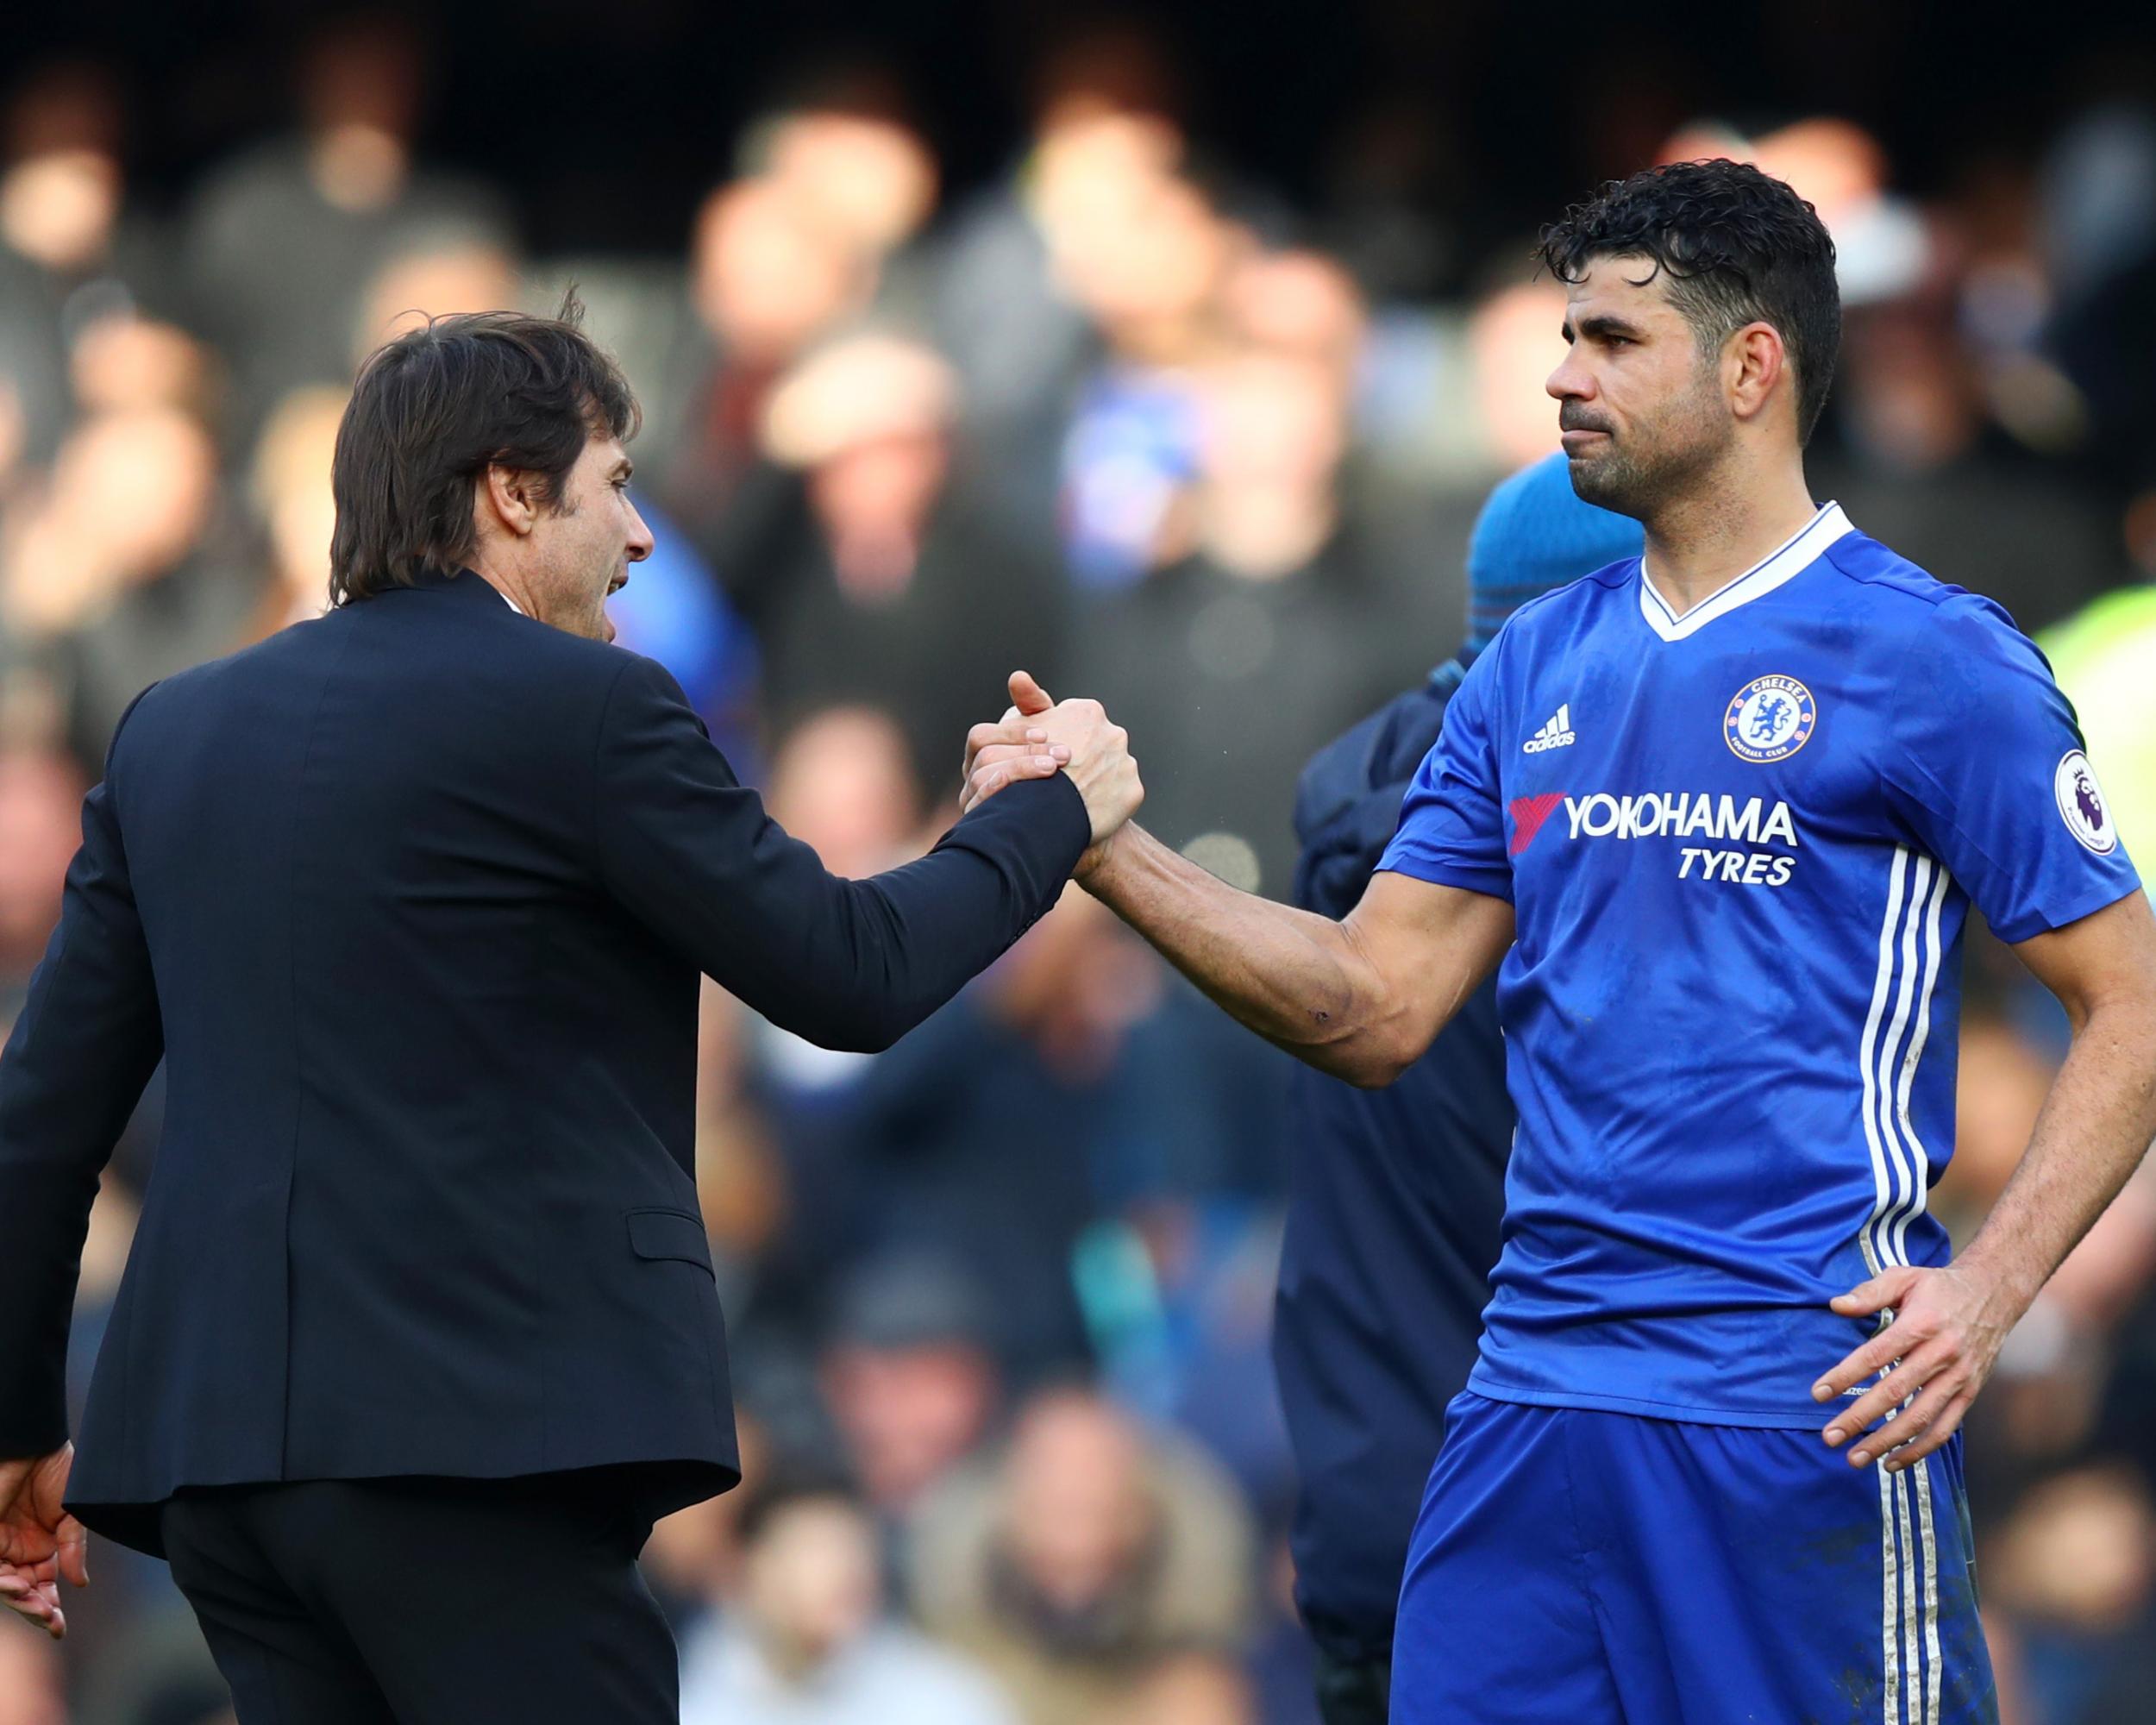 Conte admitted he would shake Costa's hand